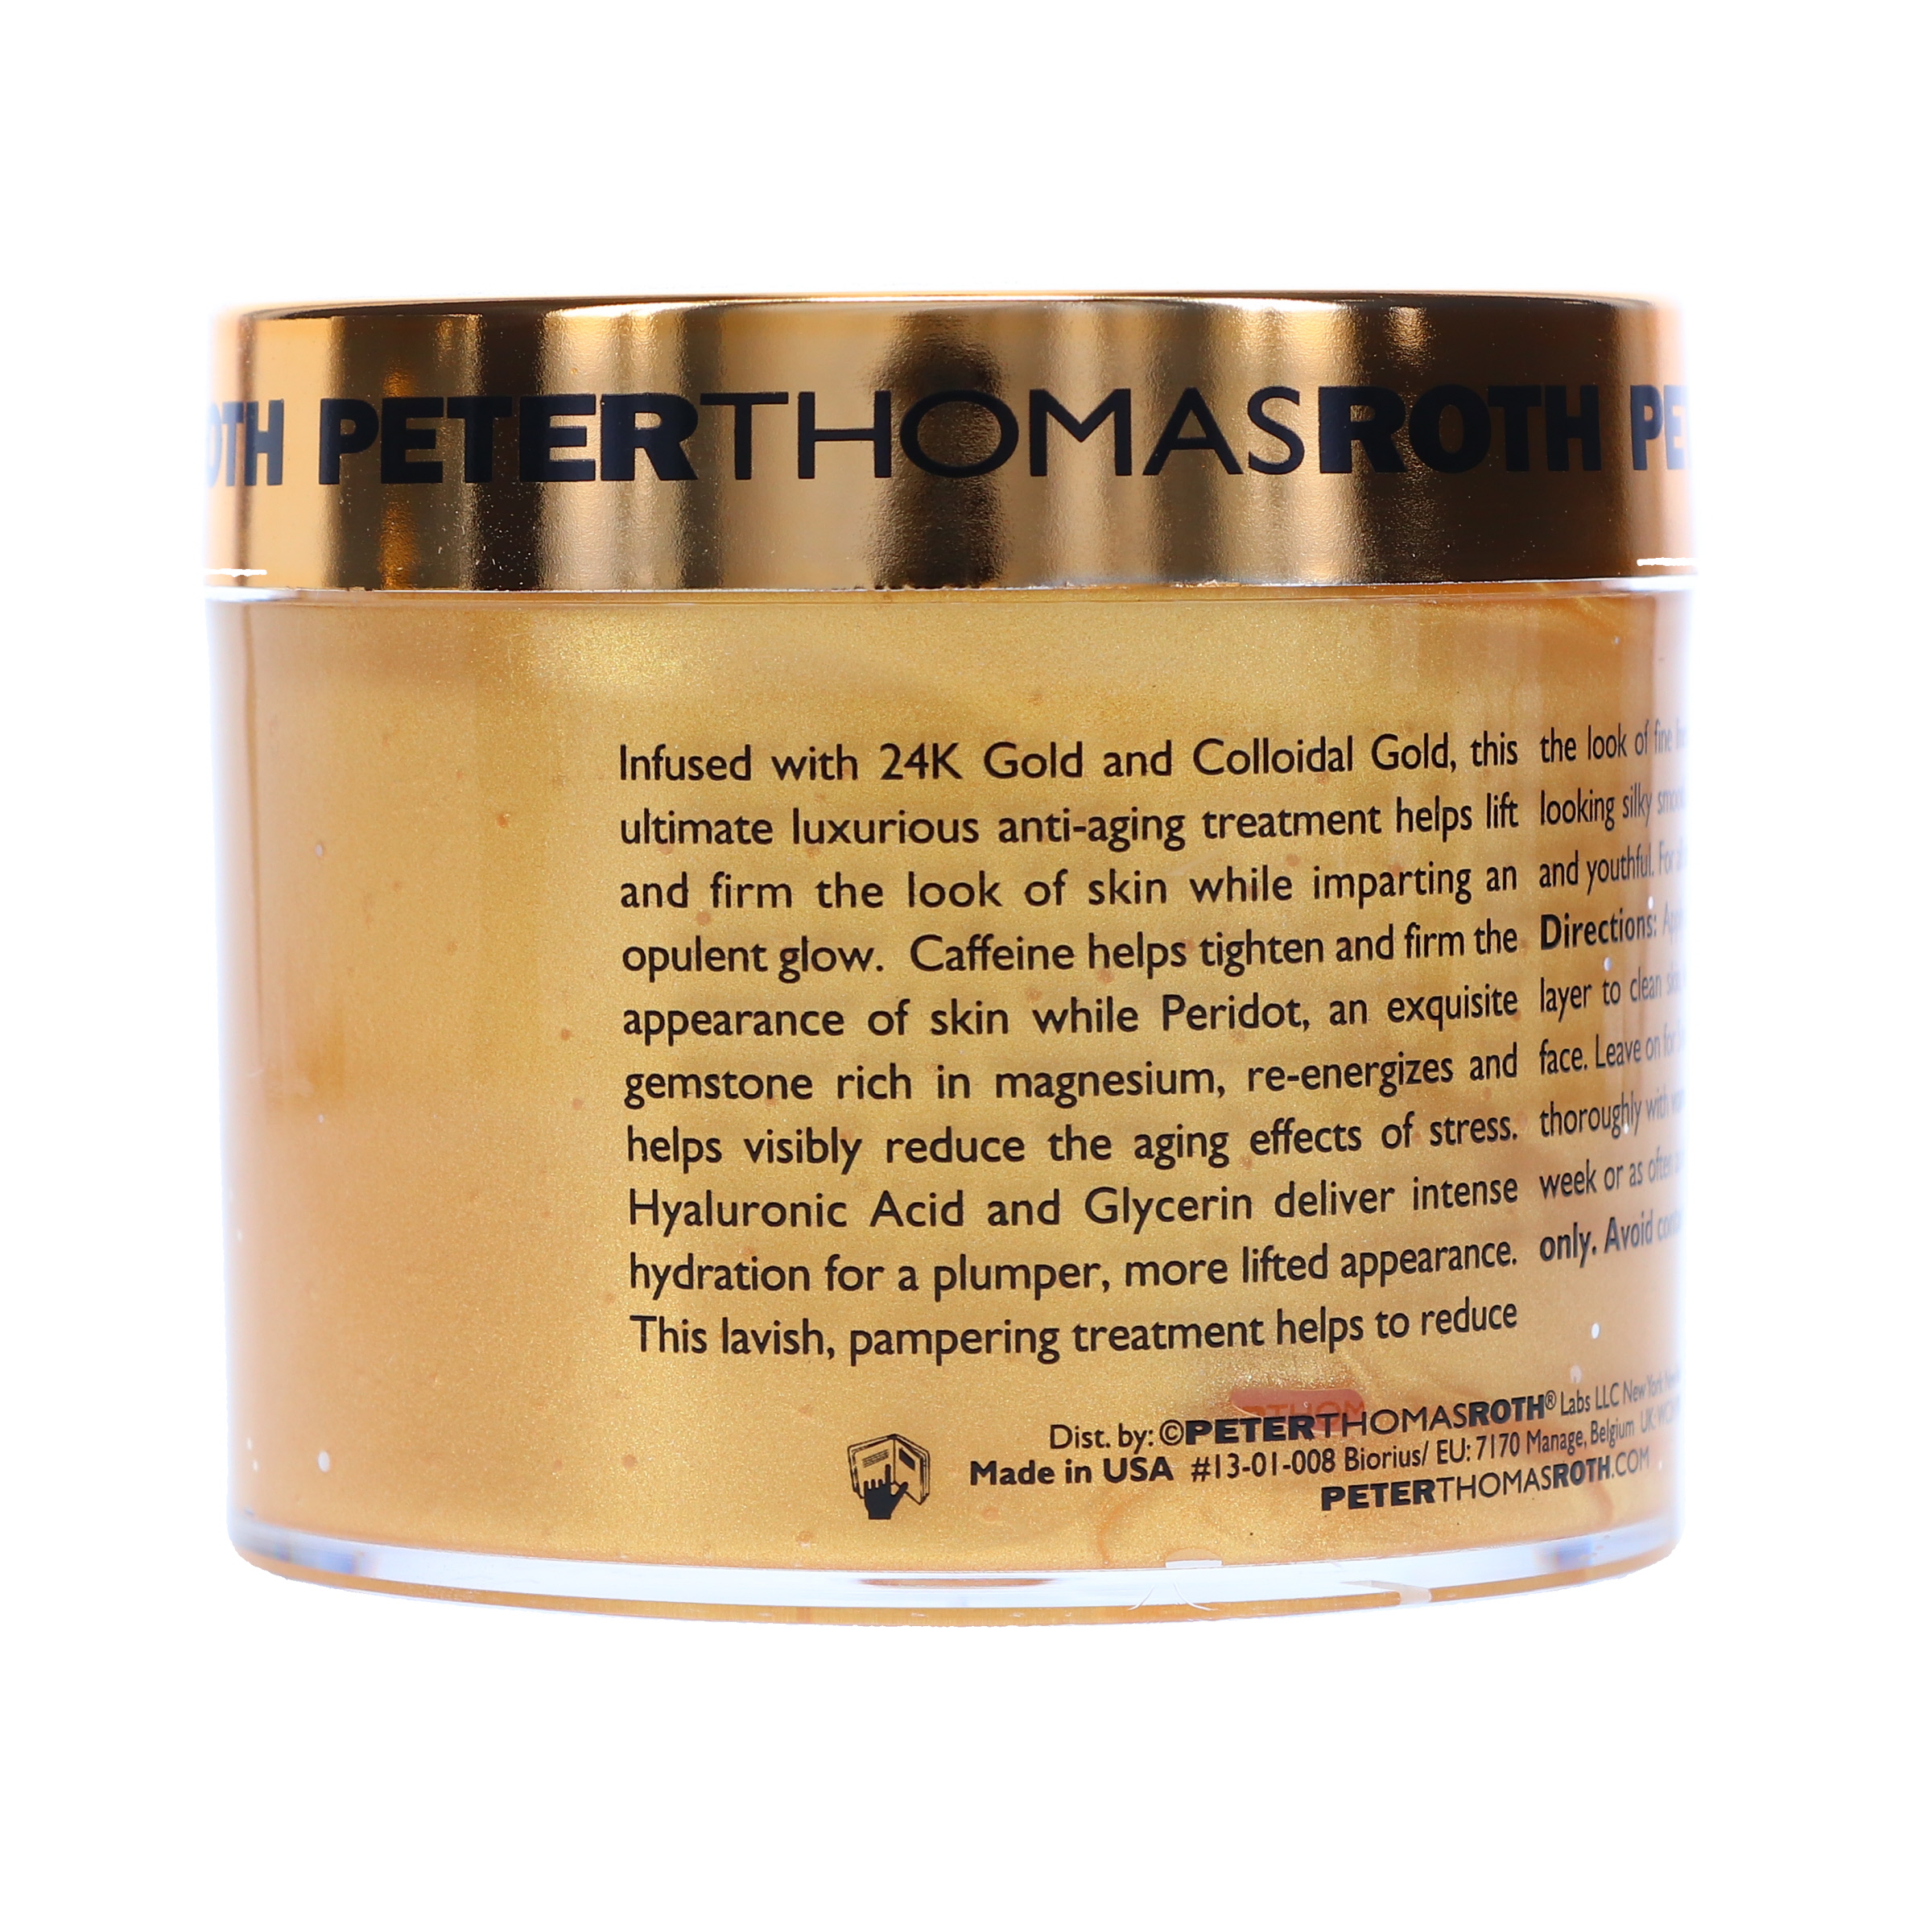 Peter Thomas Roth 24K Gold Mask Pure Luxury Lift & Firm Mask 5.1 oz - image 3 of 8